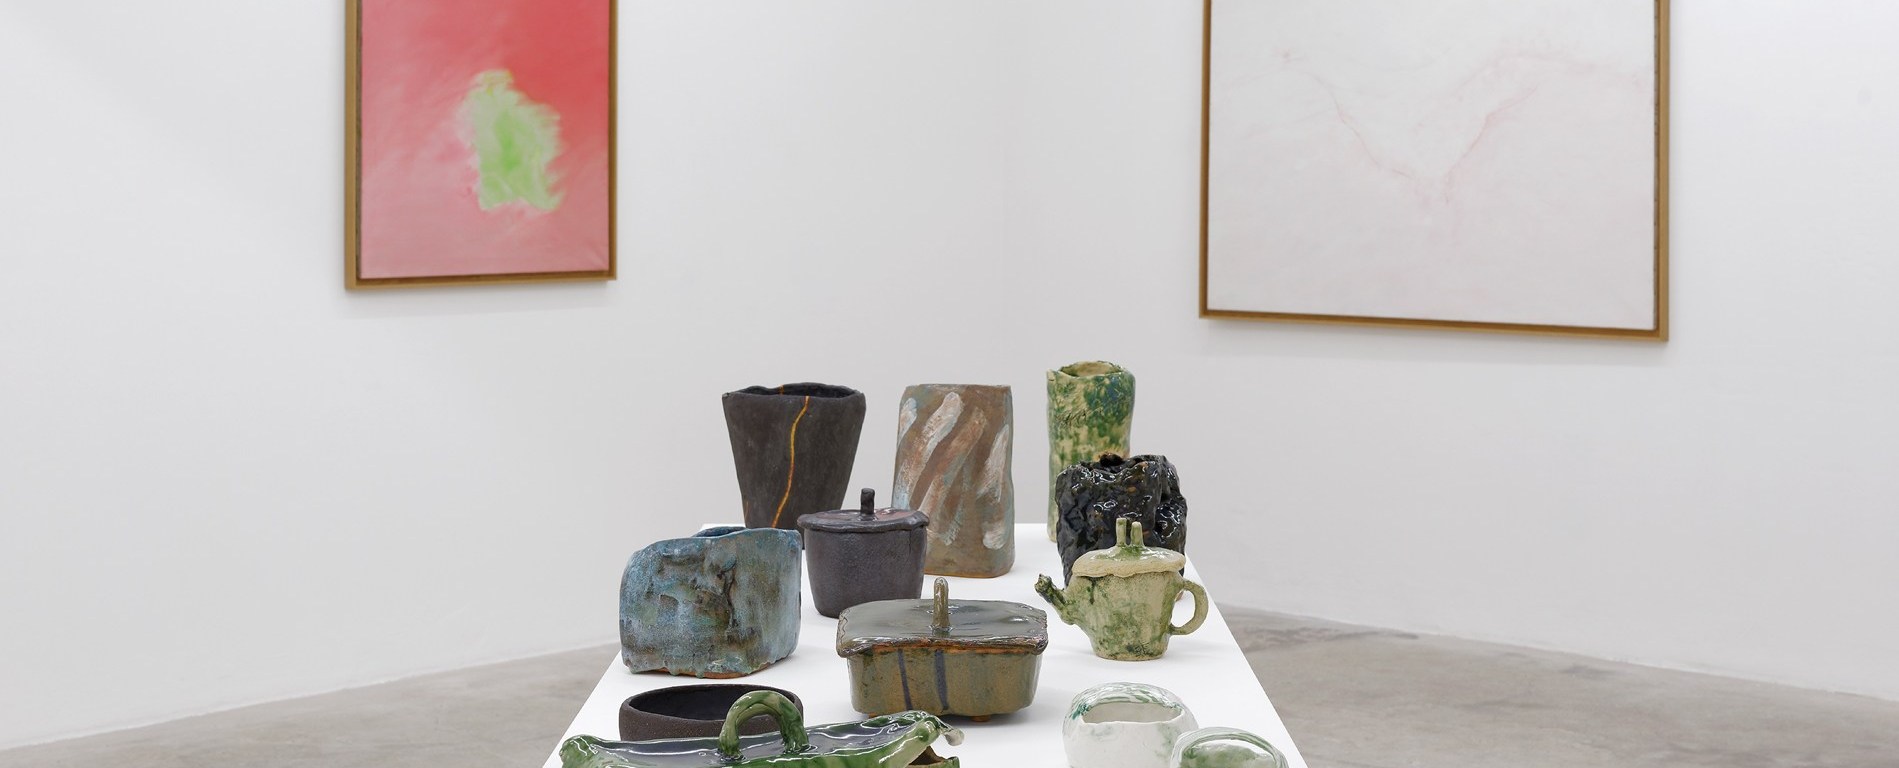 APR 21 | MAY 27 2017 - Simone Fattal PAINTINGS AND CERAMICS - Photo Balice et Hertling